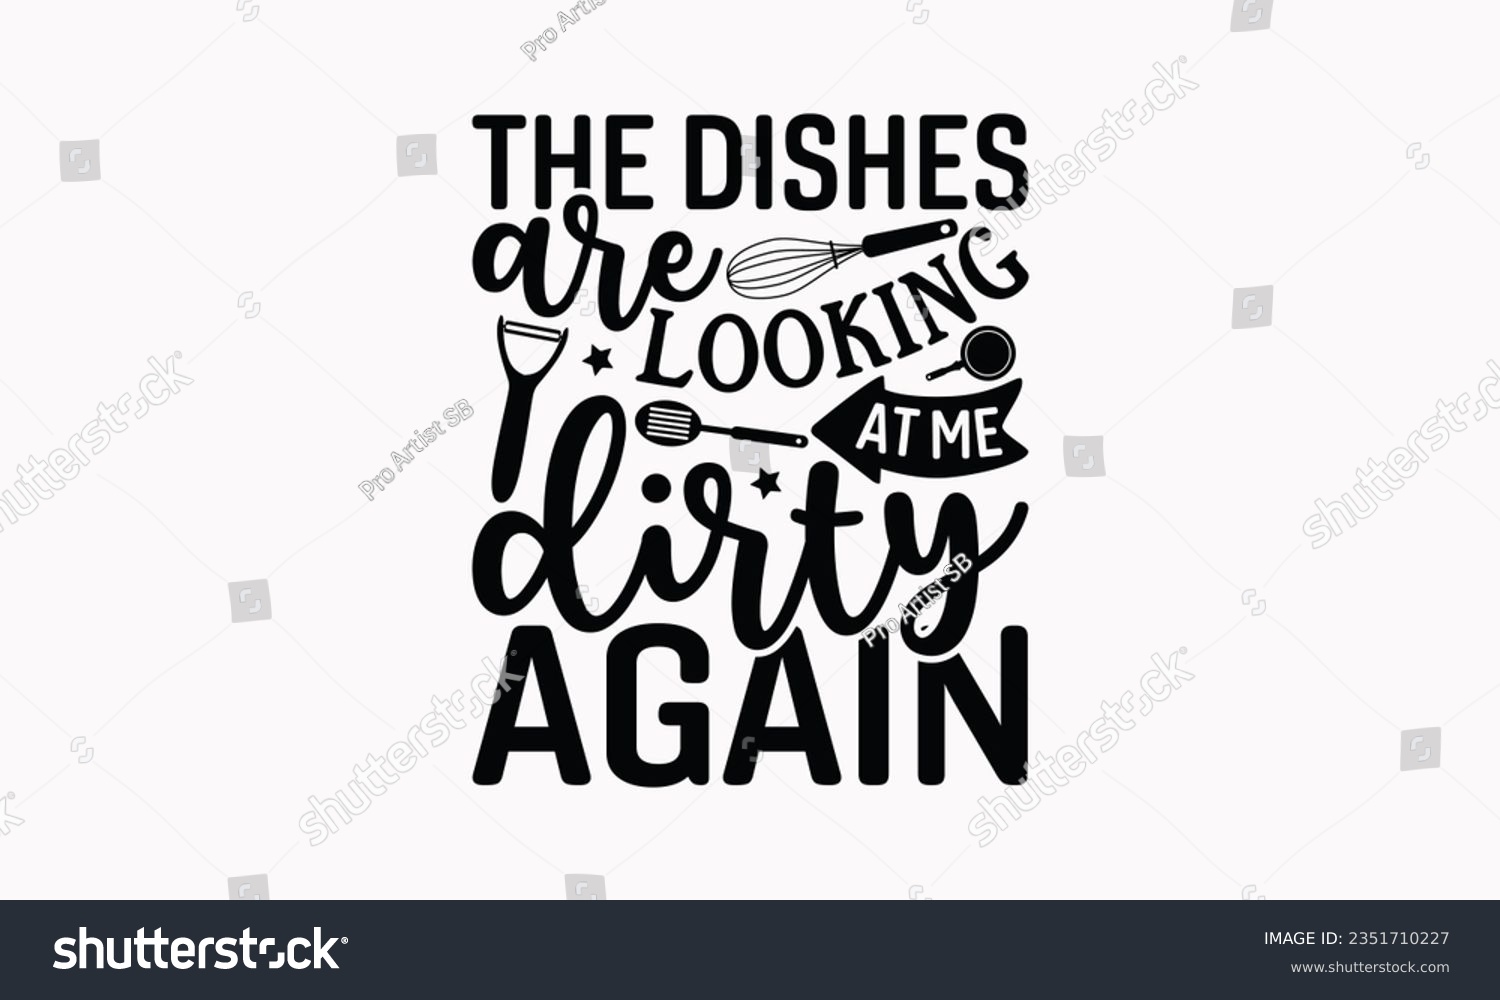 SVG of The Dishes Are Looking At Me Dirty Again - Kitchen SVG Design, Barbeque Grill Quotes, Calligraphy Graphic Design, and Typography Poster with Old Style Camera and Quote. svg